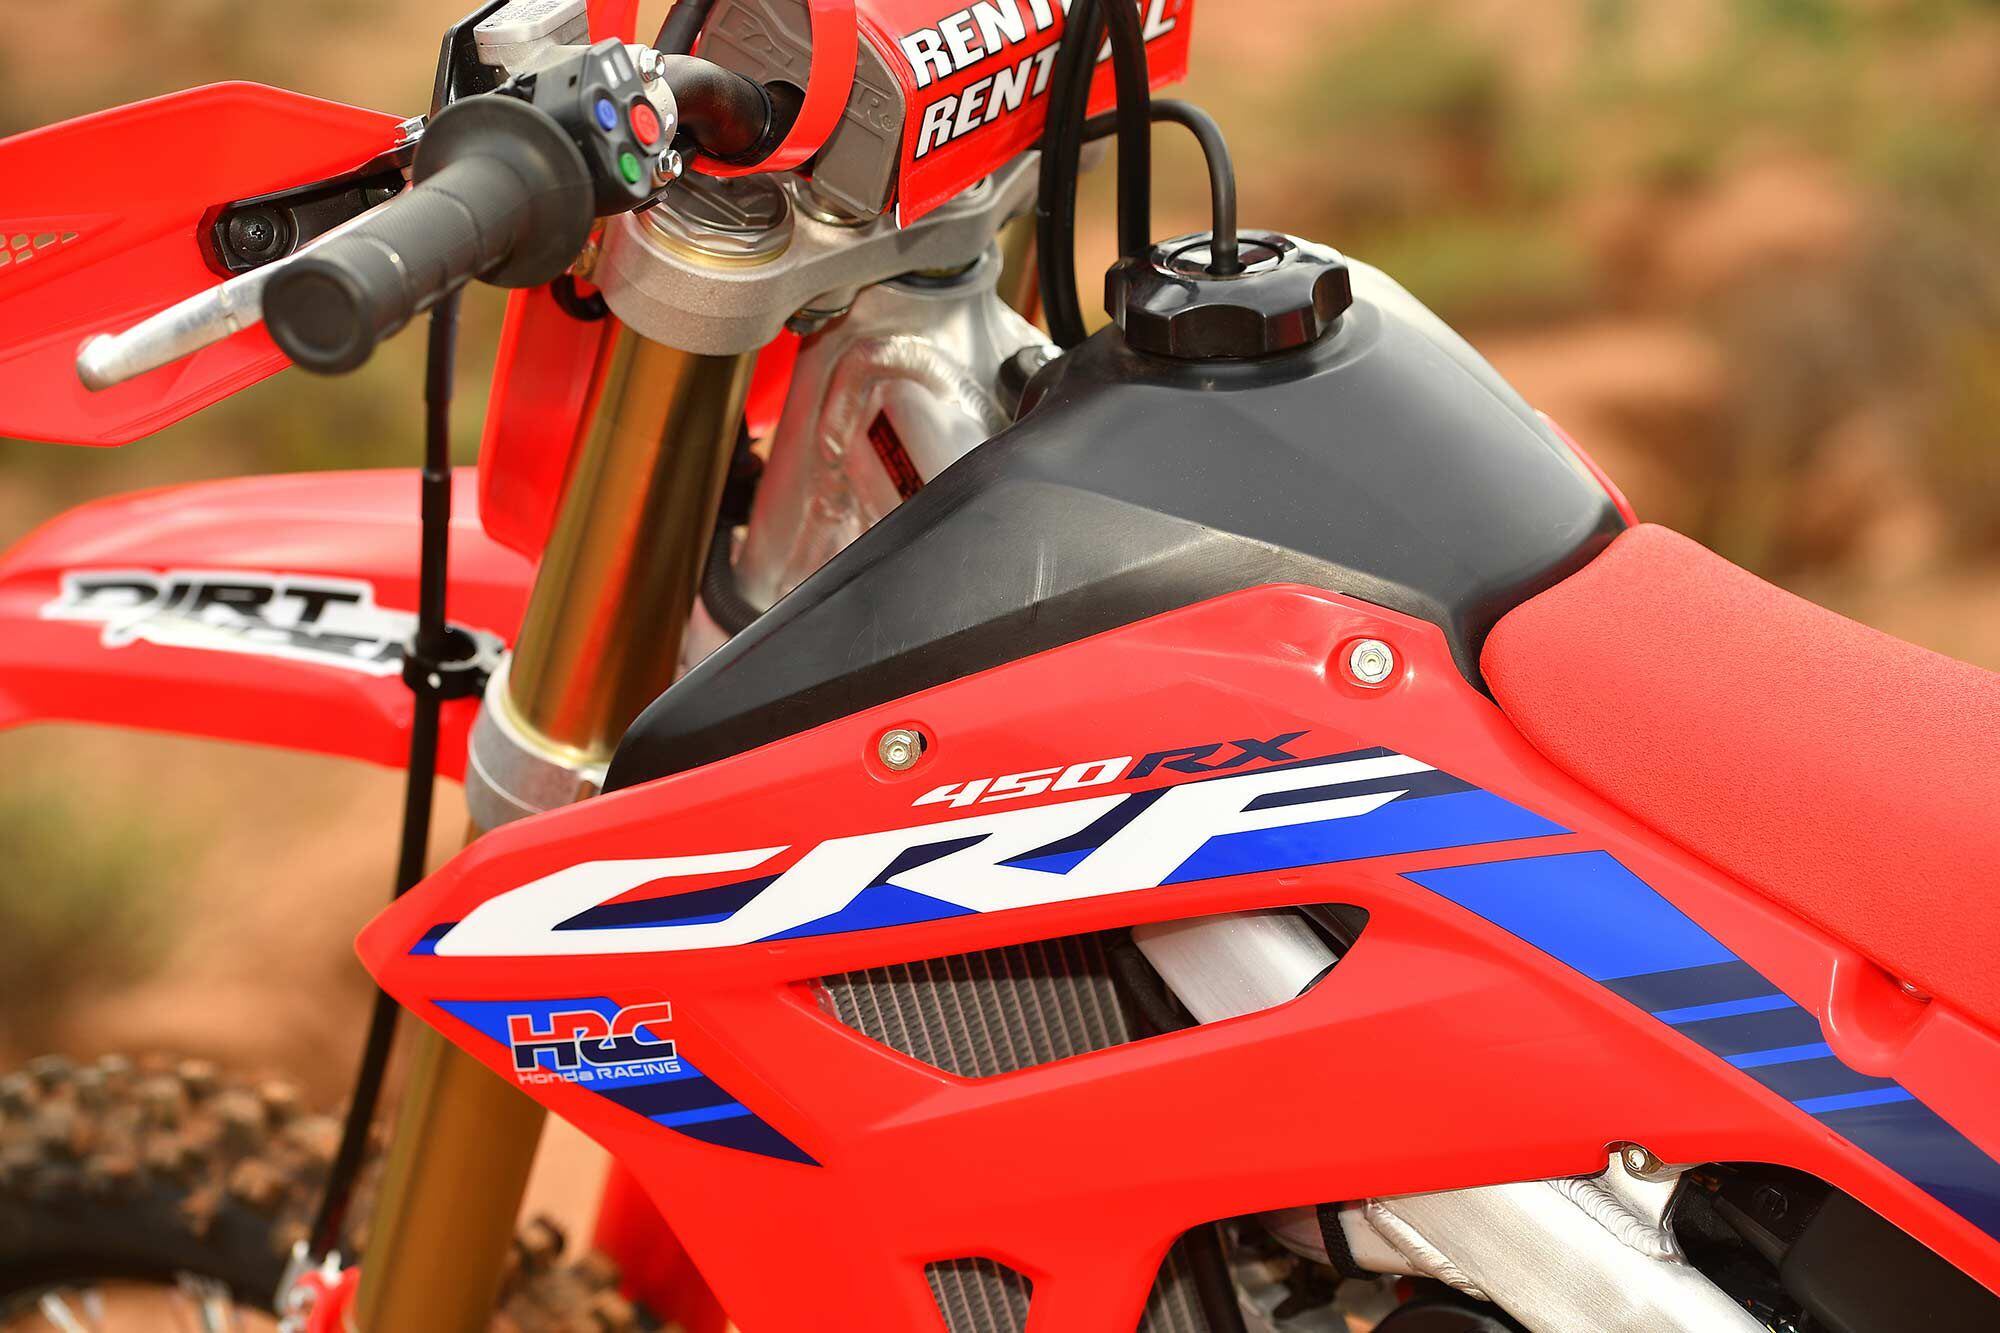 The 2.1-gallon resin fuel tank is sleek for its capacity, while the red/white/blue accents on the radiator shrouds look clean and factory. You can also catch a glimpse of the red/blue/green handlebar-mounted electronics switch here.